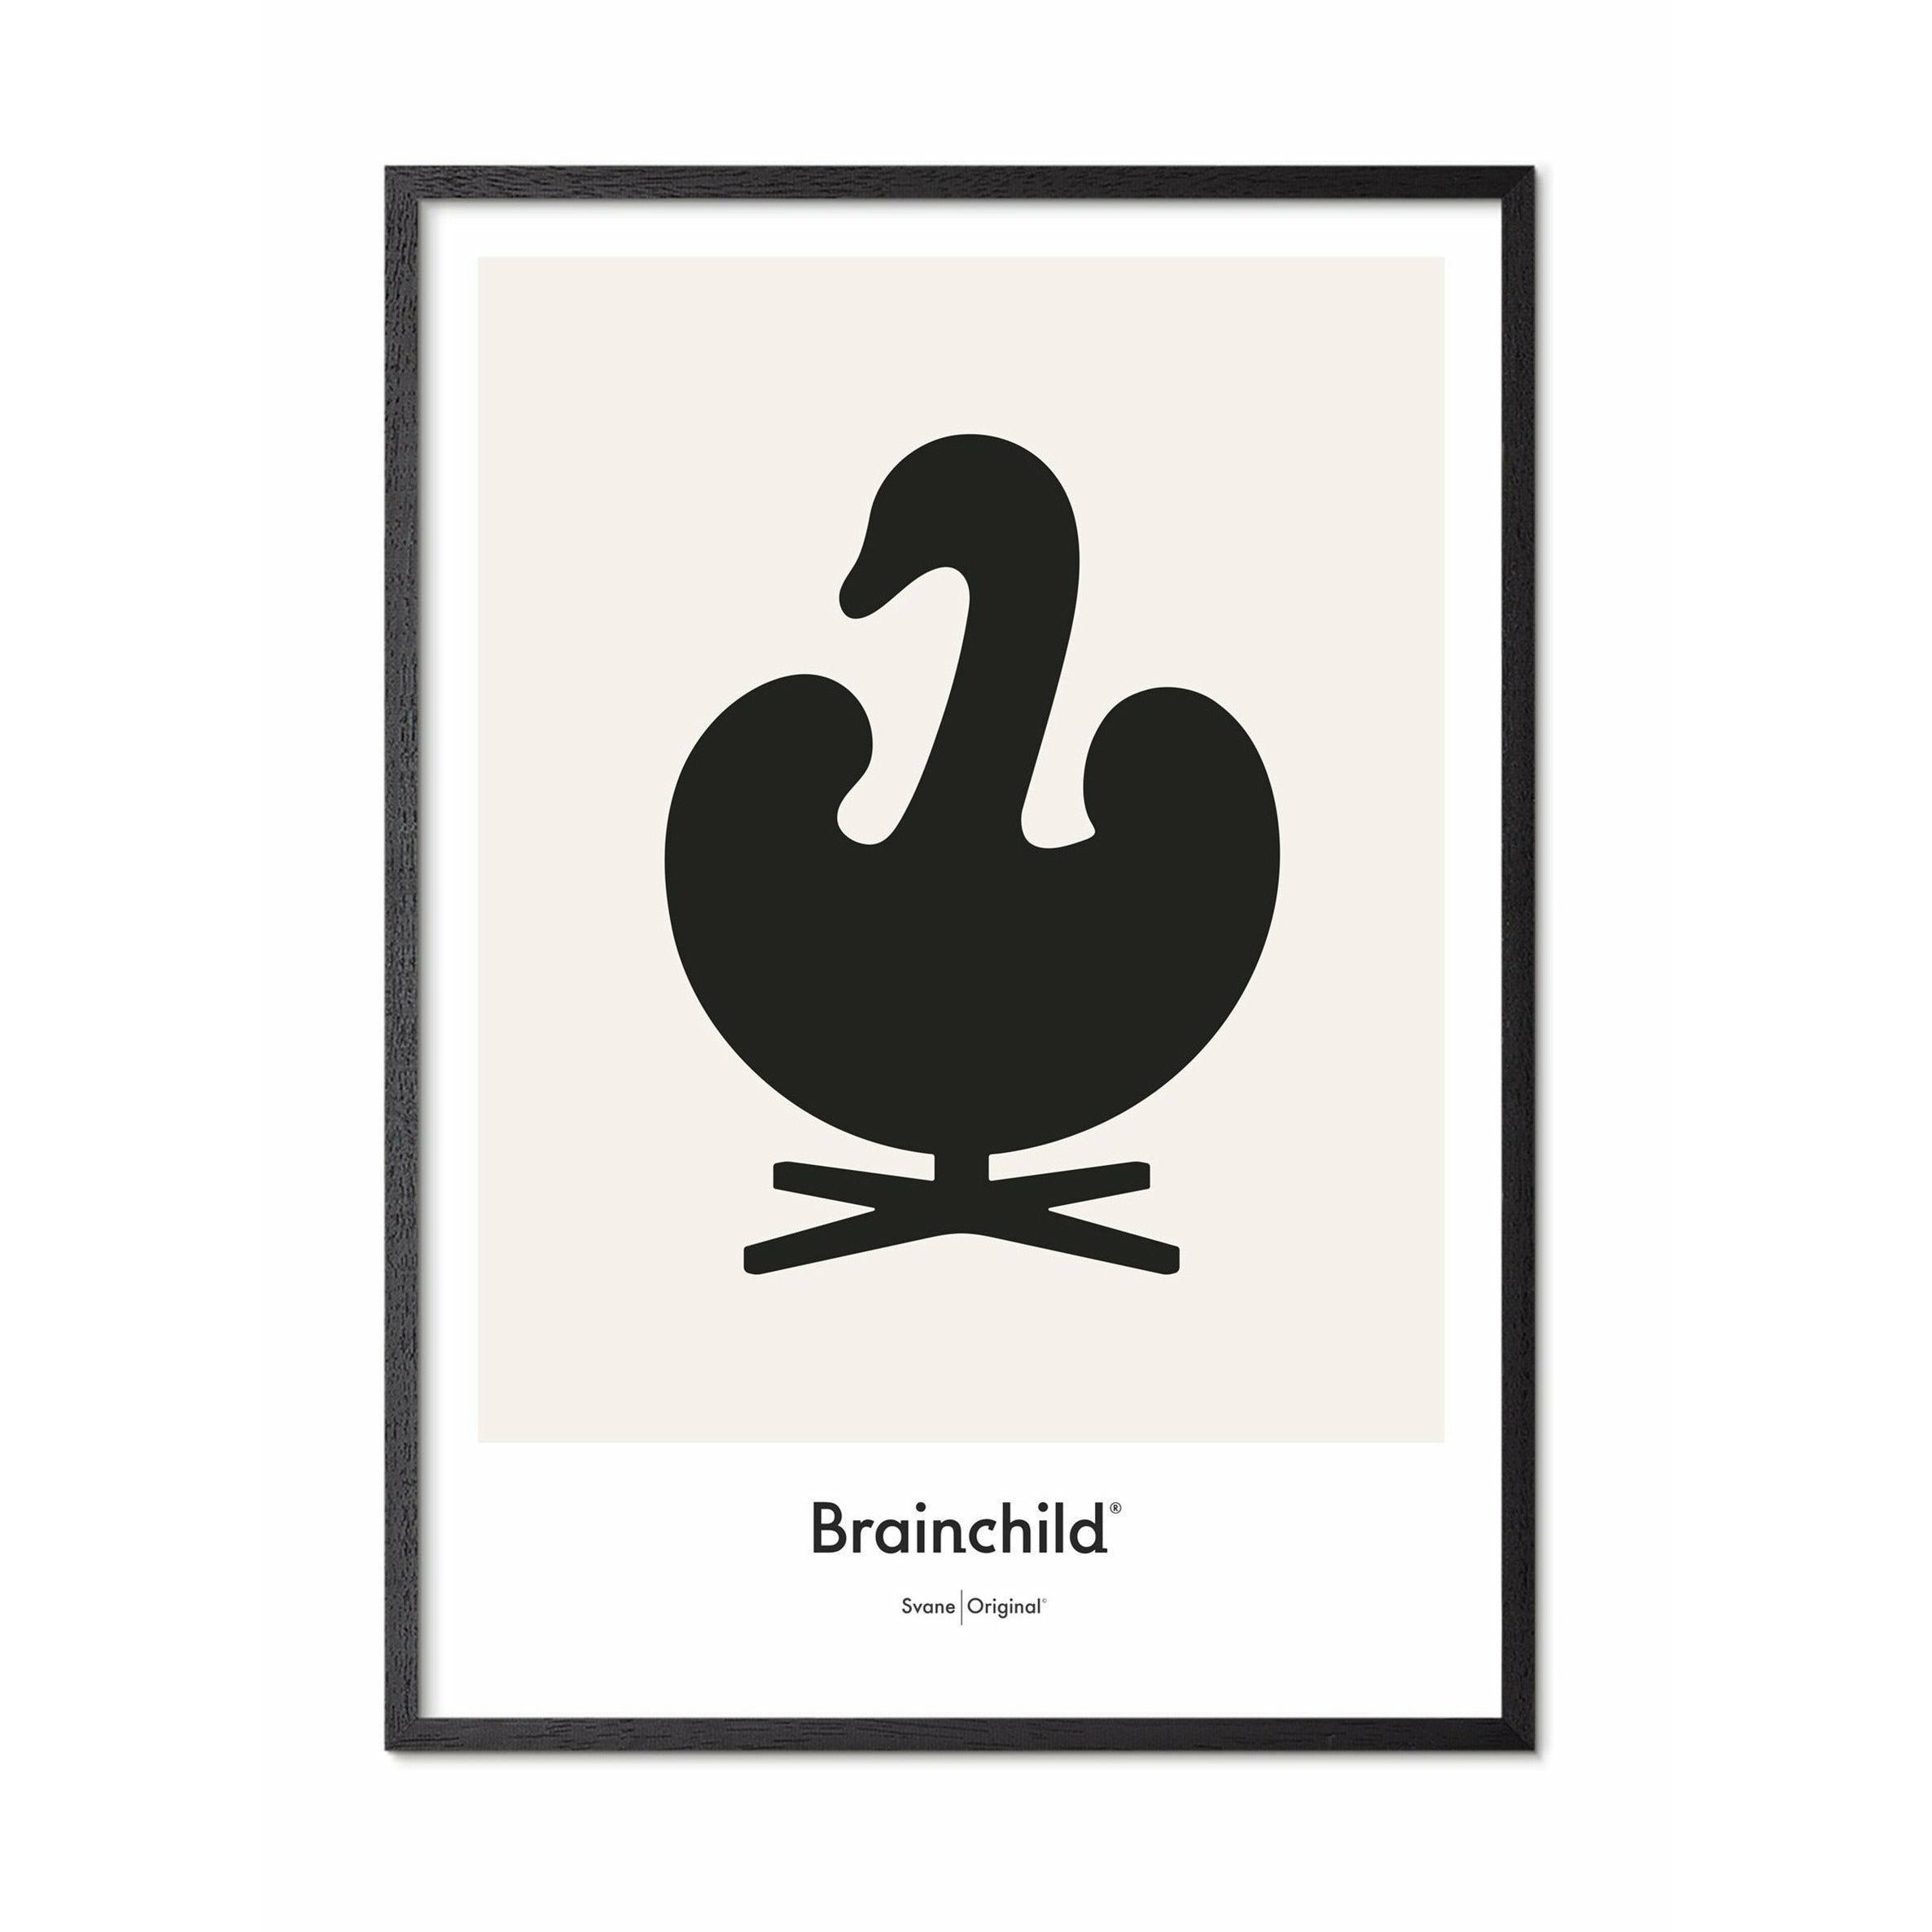 Brainchild Swan Design Icon Poster, Frame Made Of Black Lacquered Wood 30x40 Cm, Grey